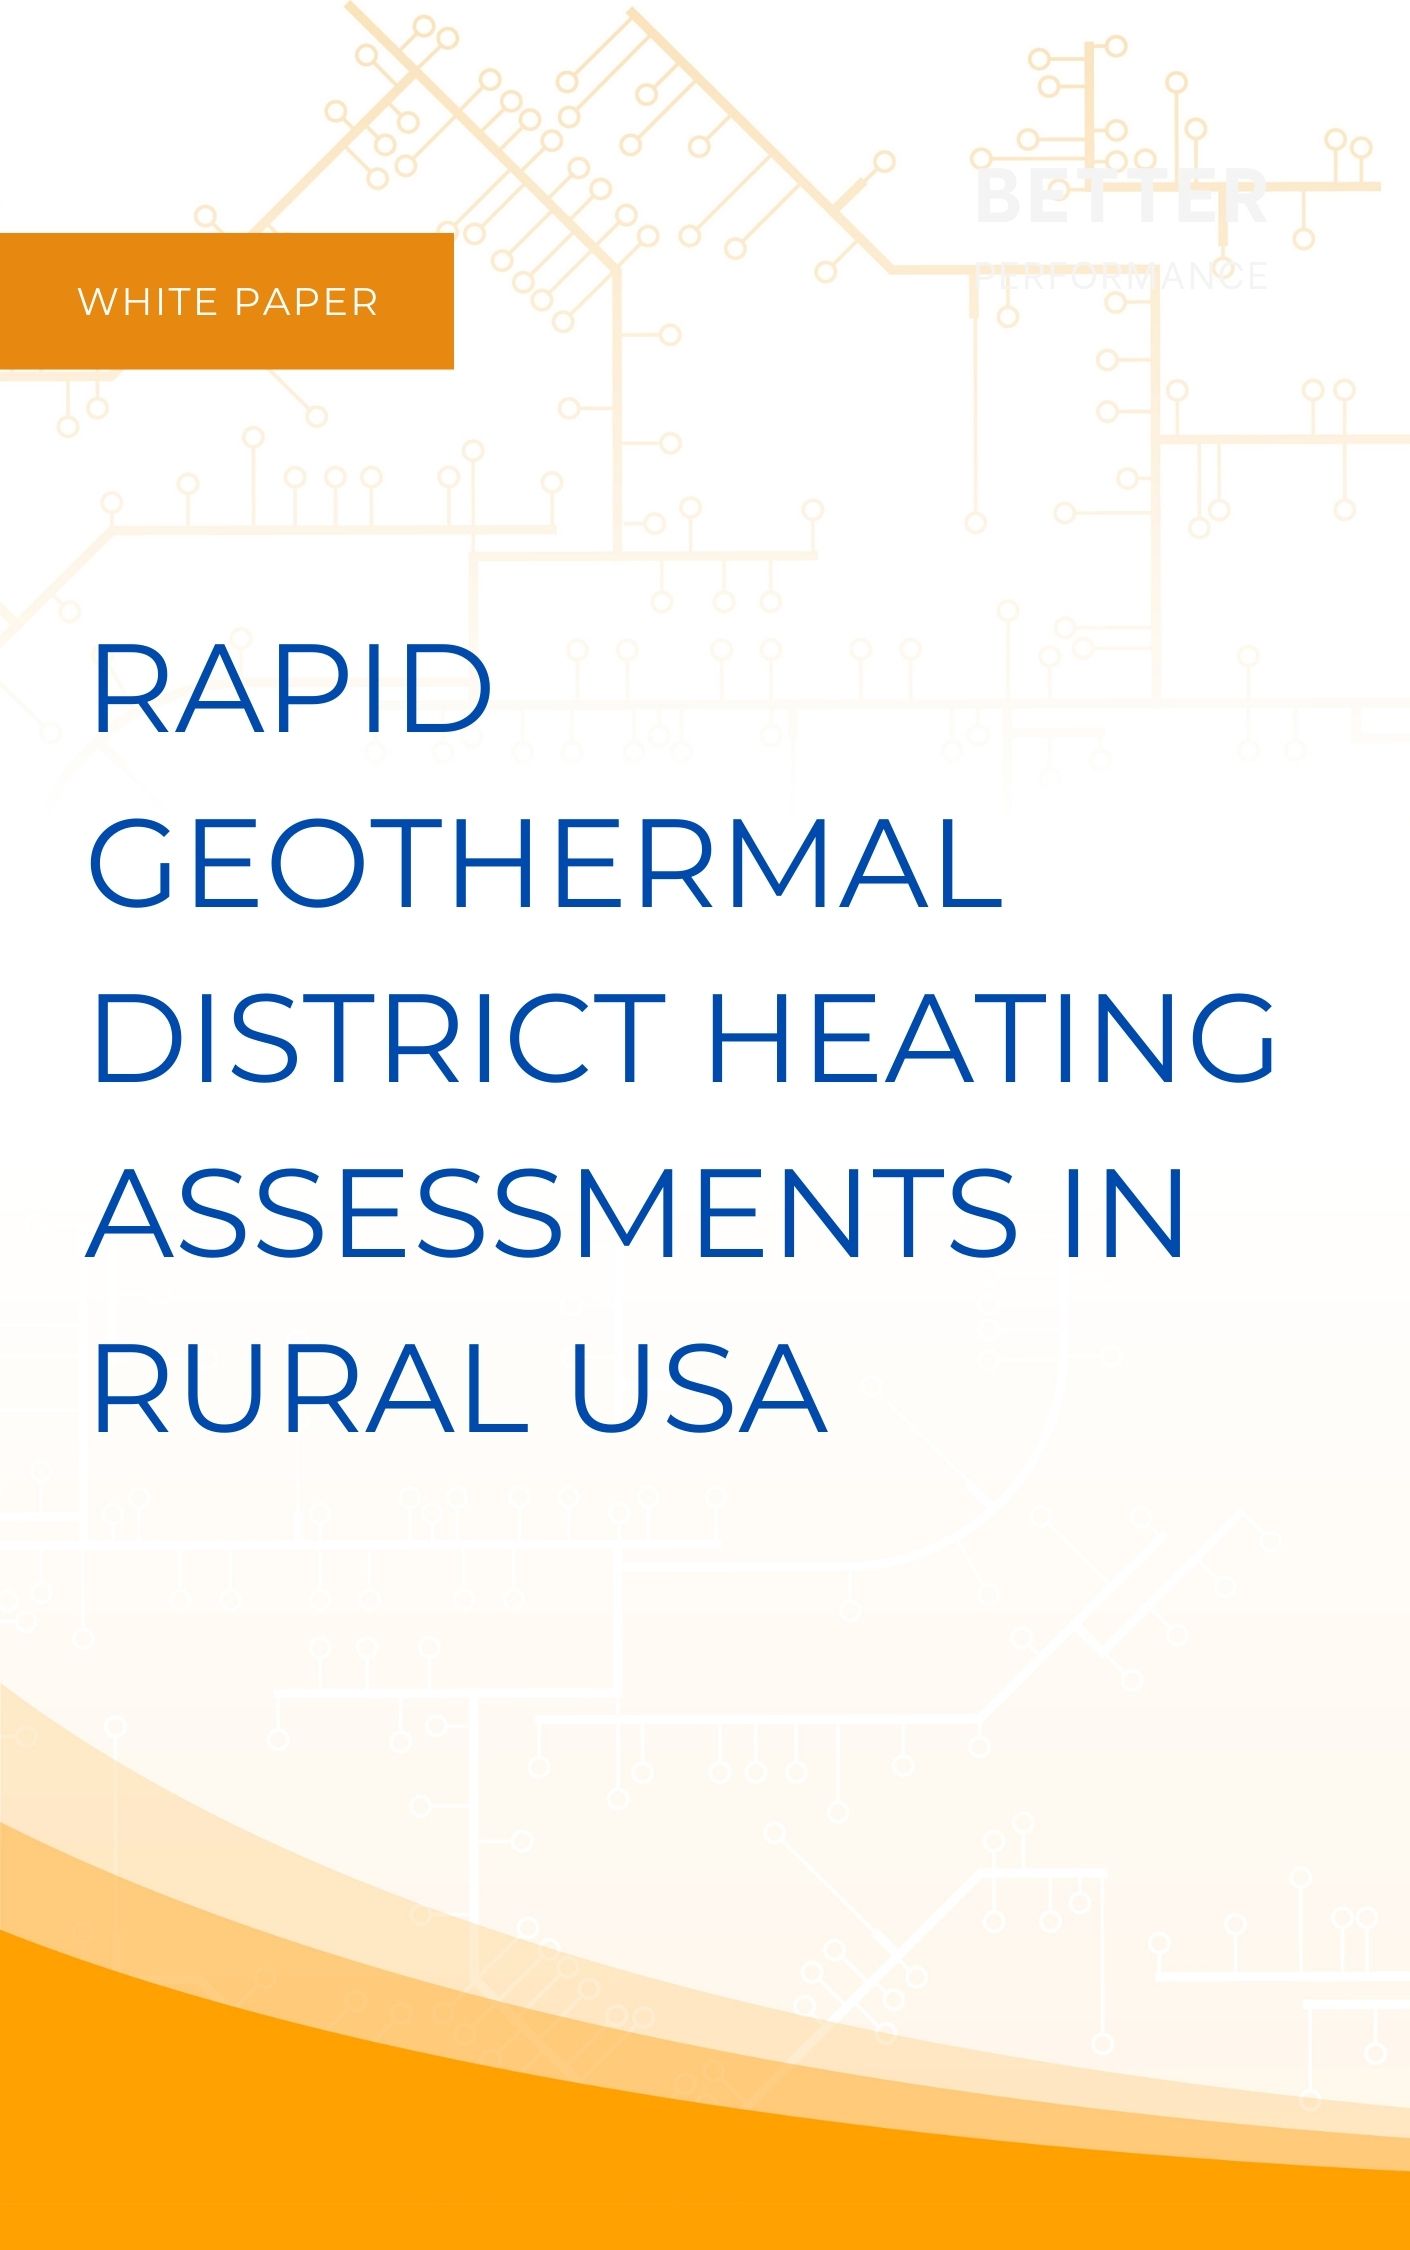 Rapid geothermal district heating assessments in rural USA